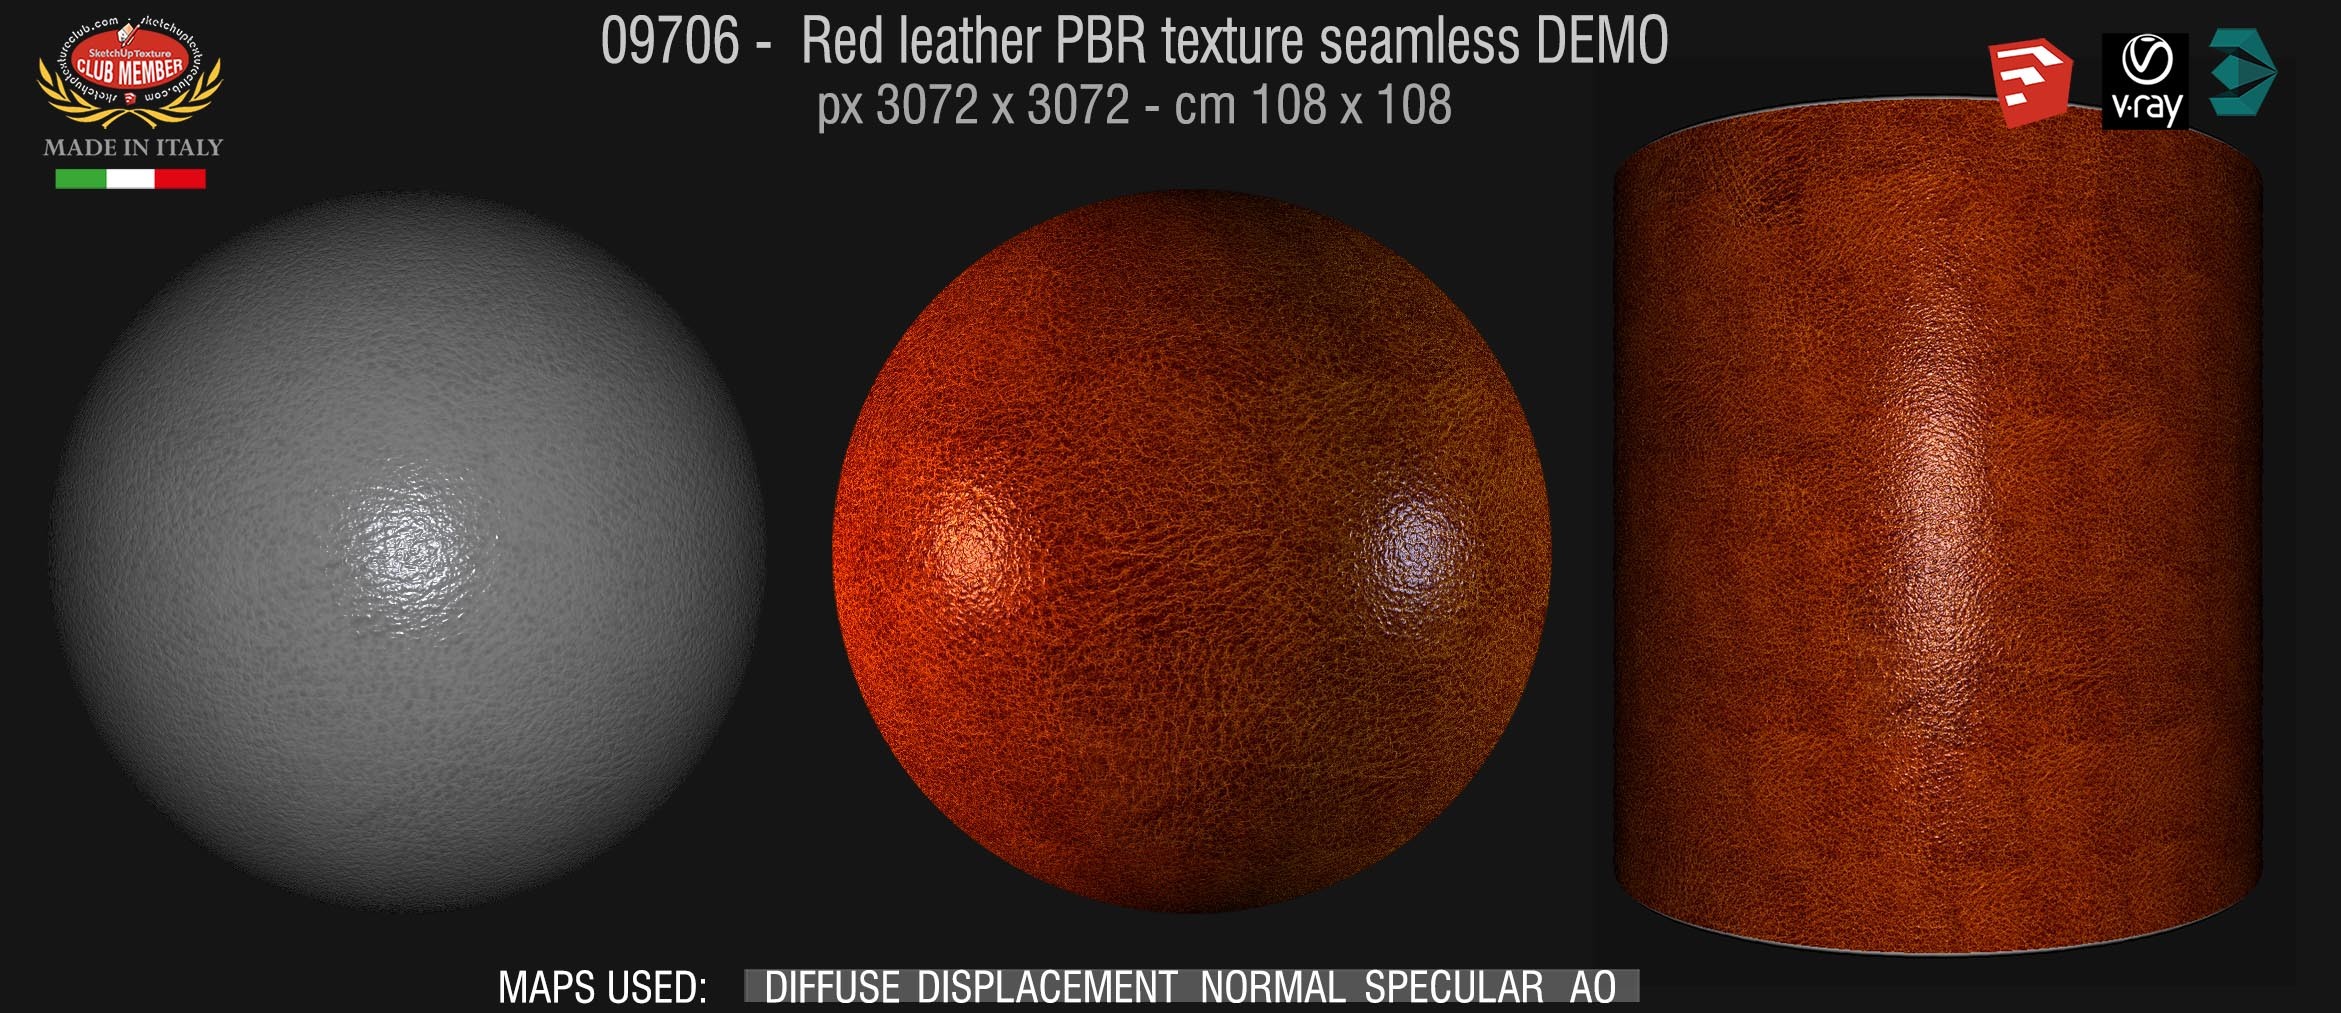 09706 Red leather PBR texture seamless DEMO